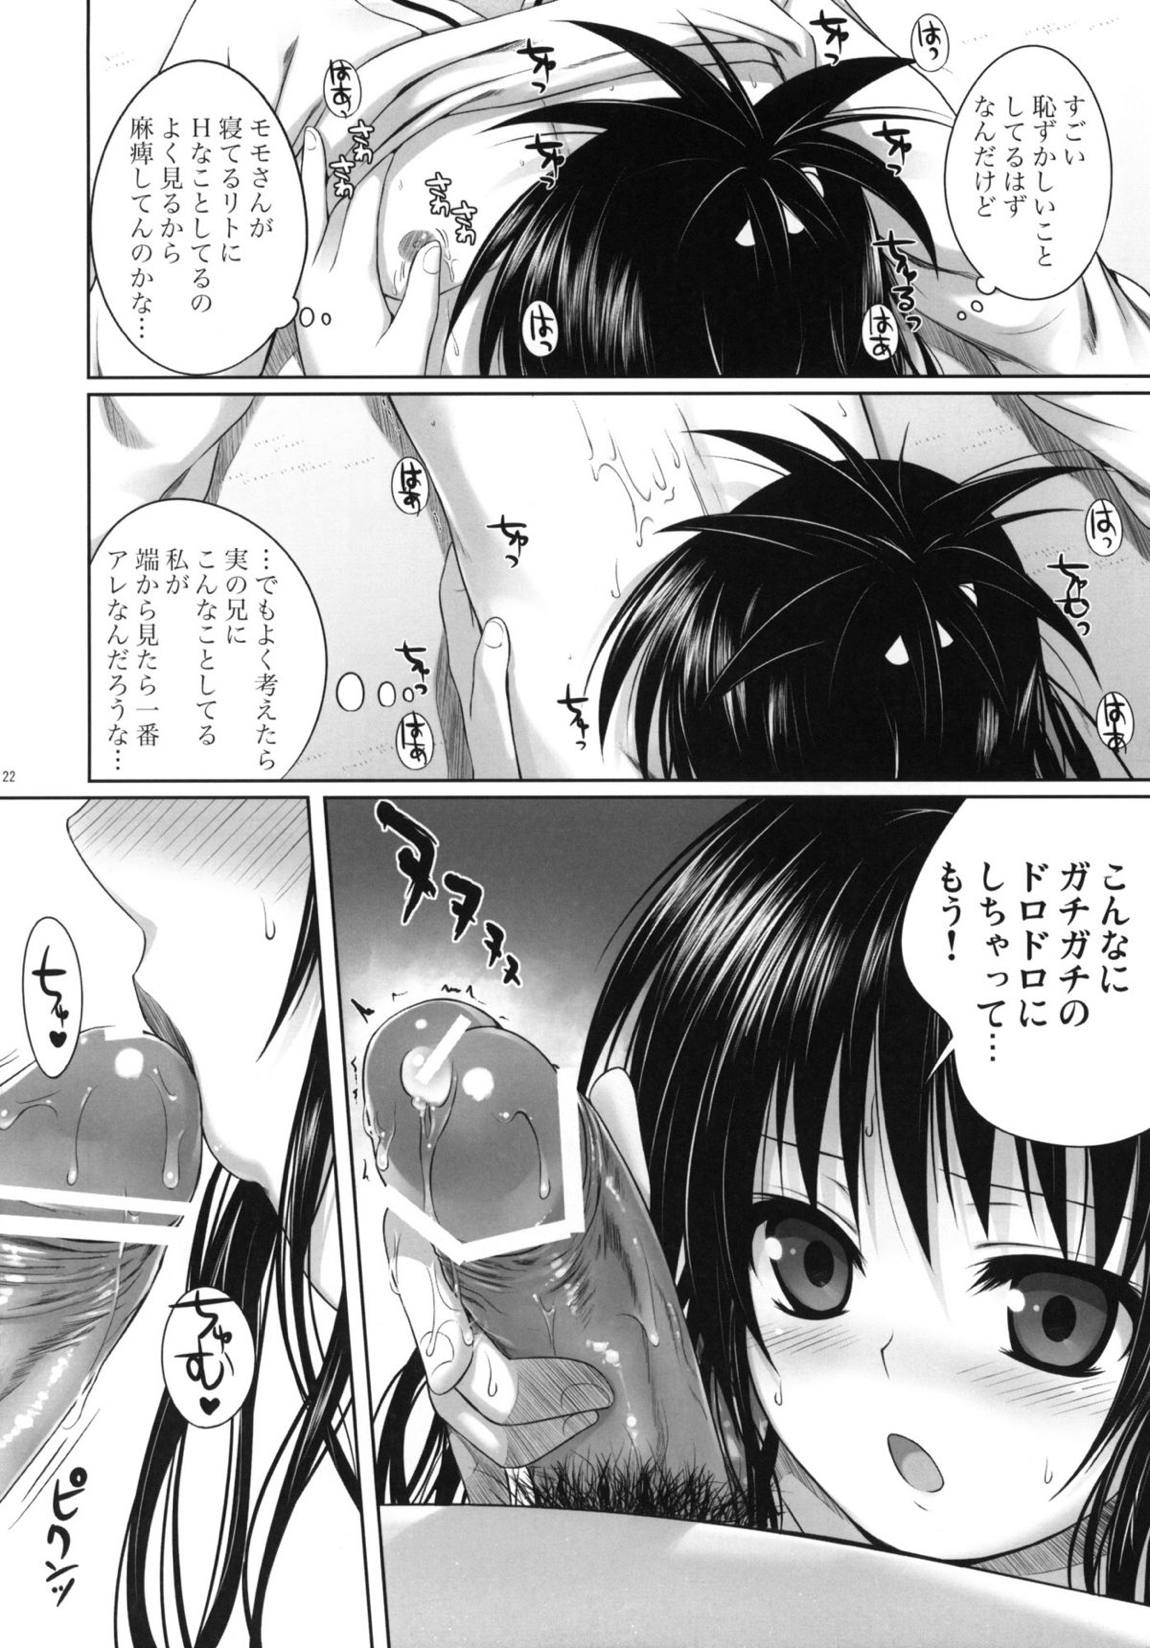 Mikan’s delusion, and usual days 22ページ